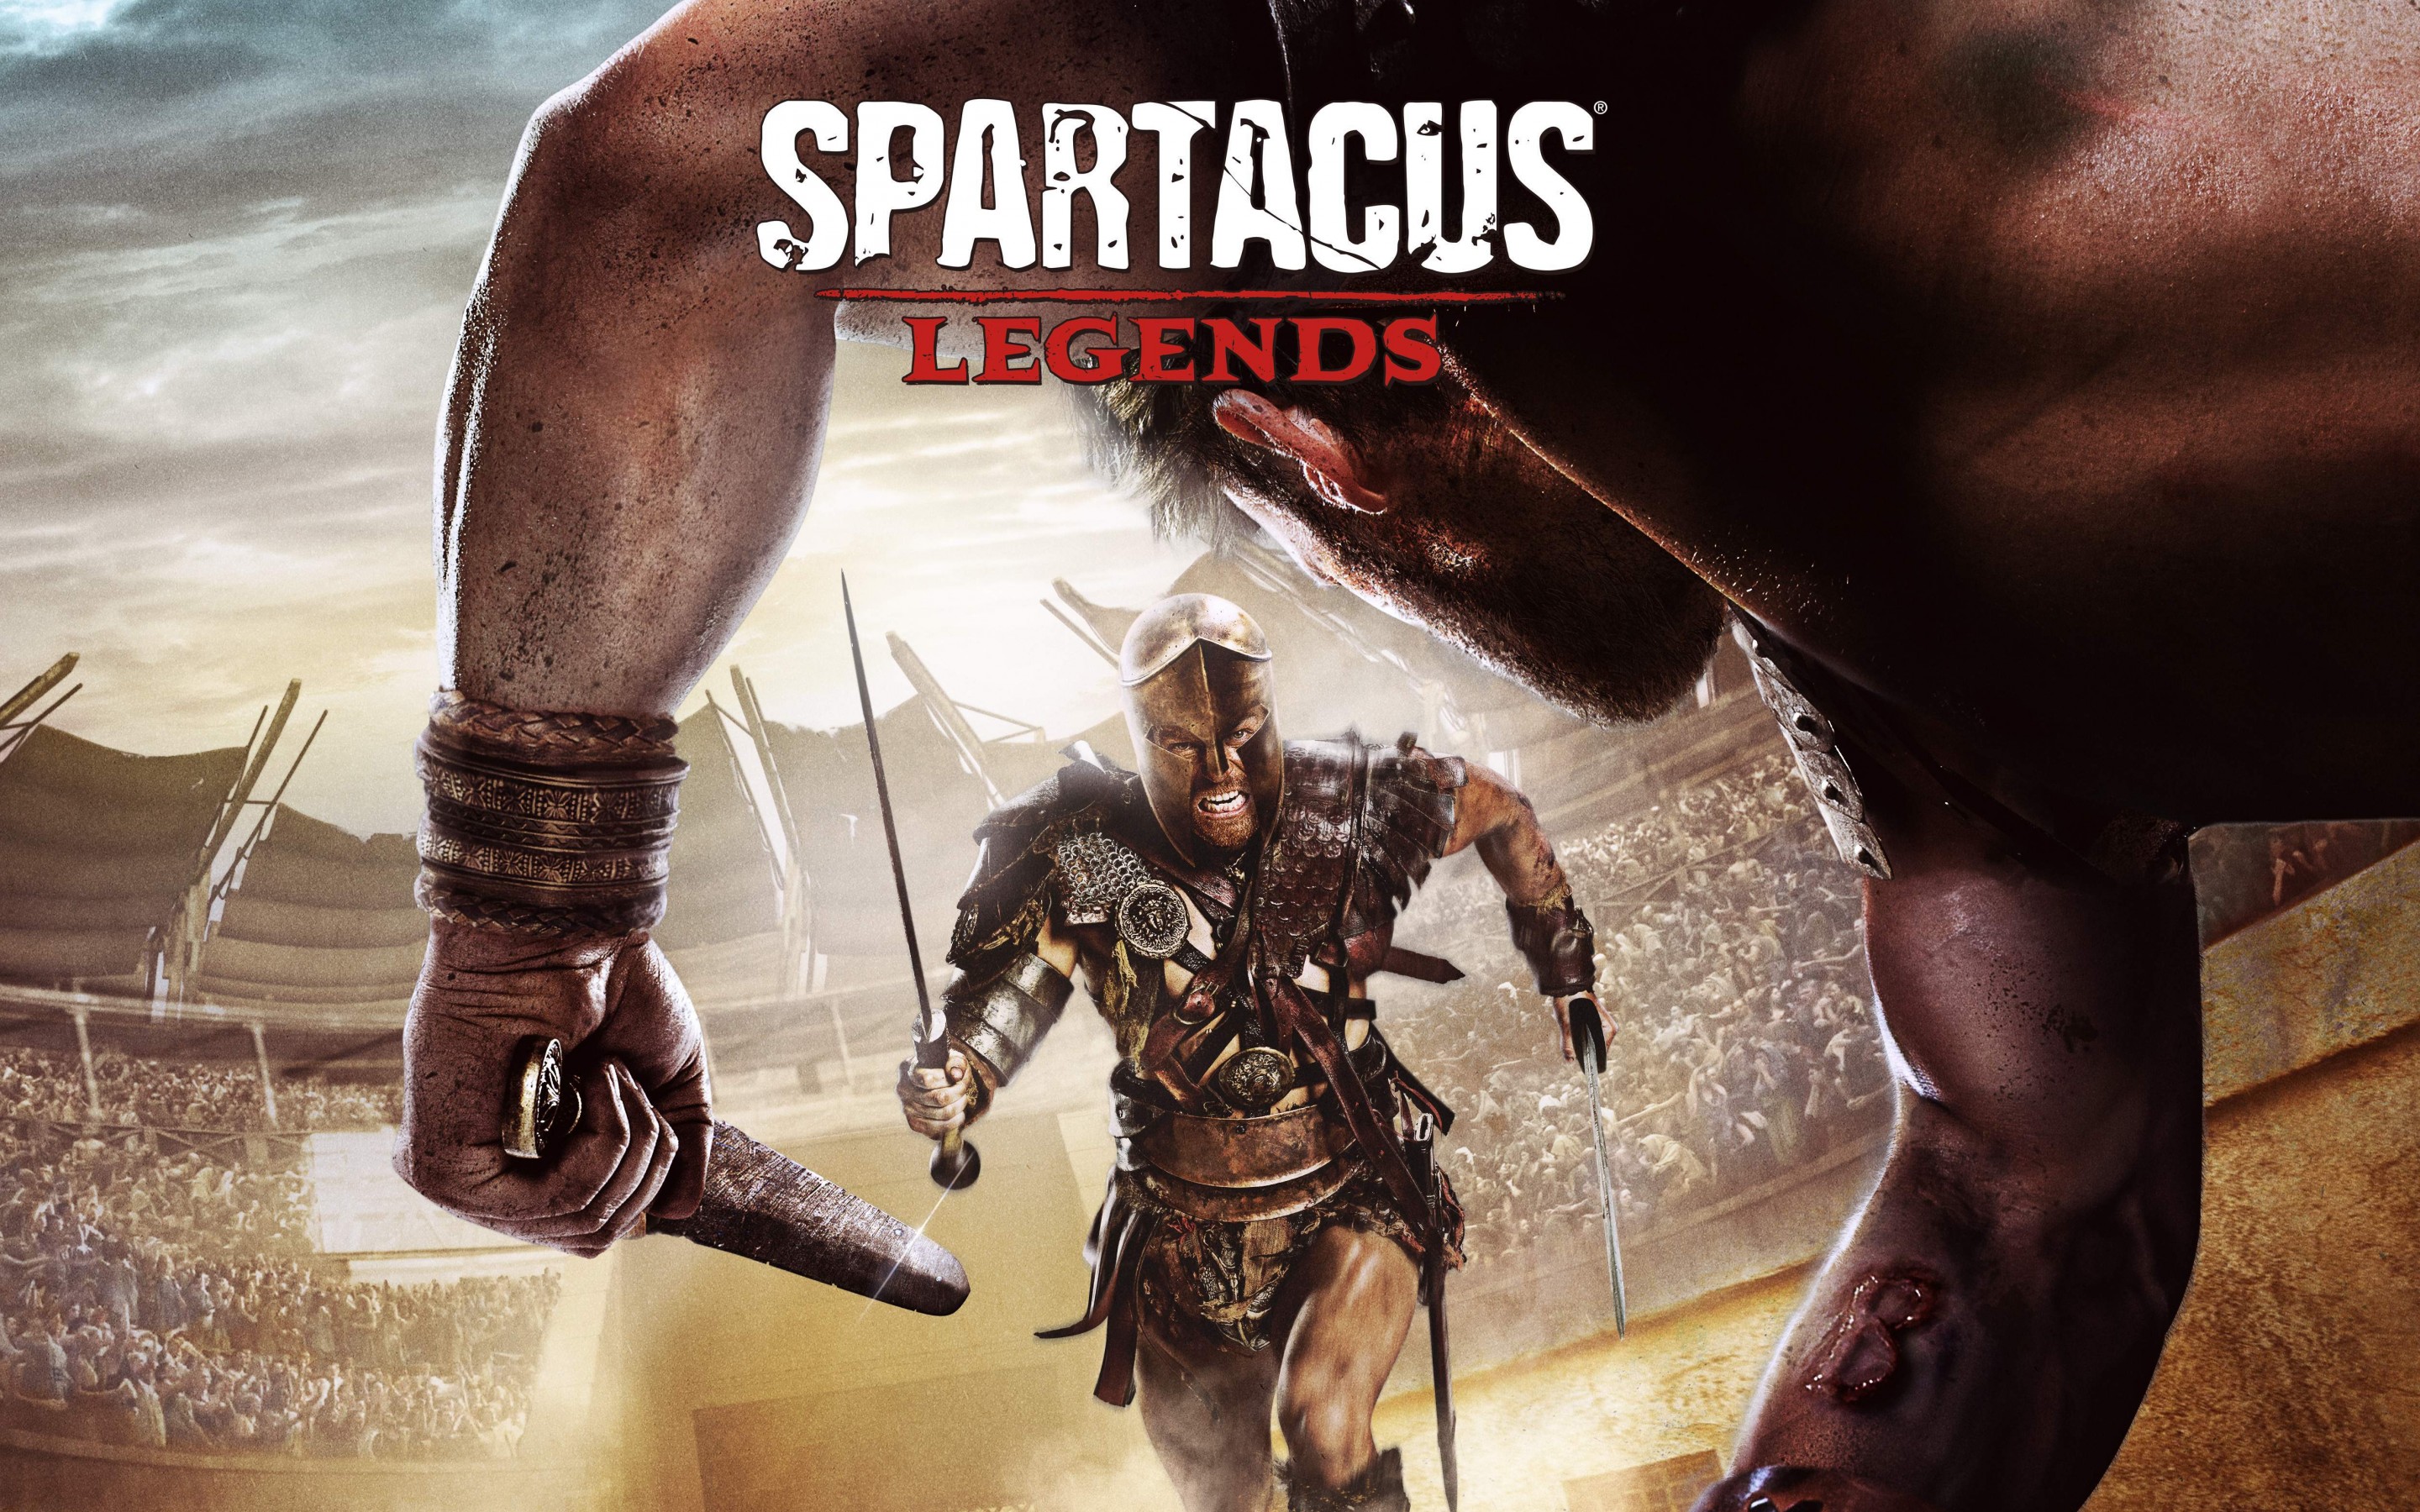 Spartacus 4k Wallpapers For Your Desktop Or Mobile Screen Free And Easy To Download